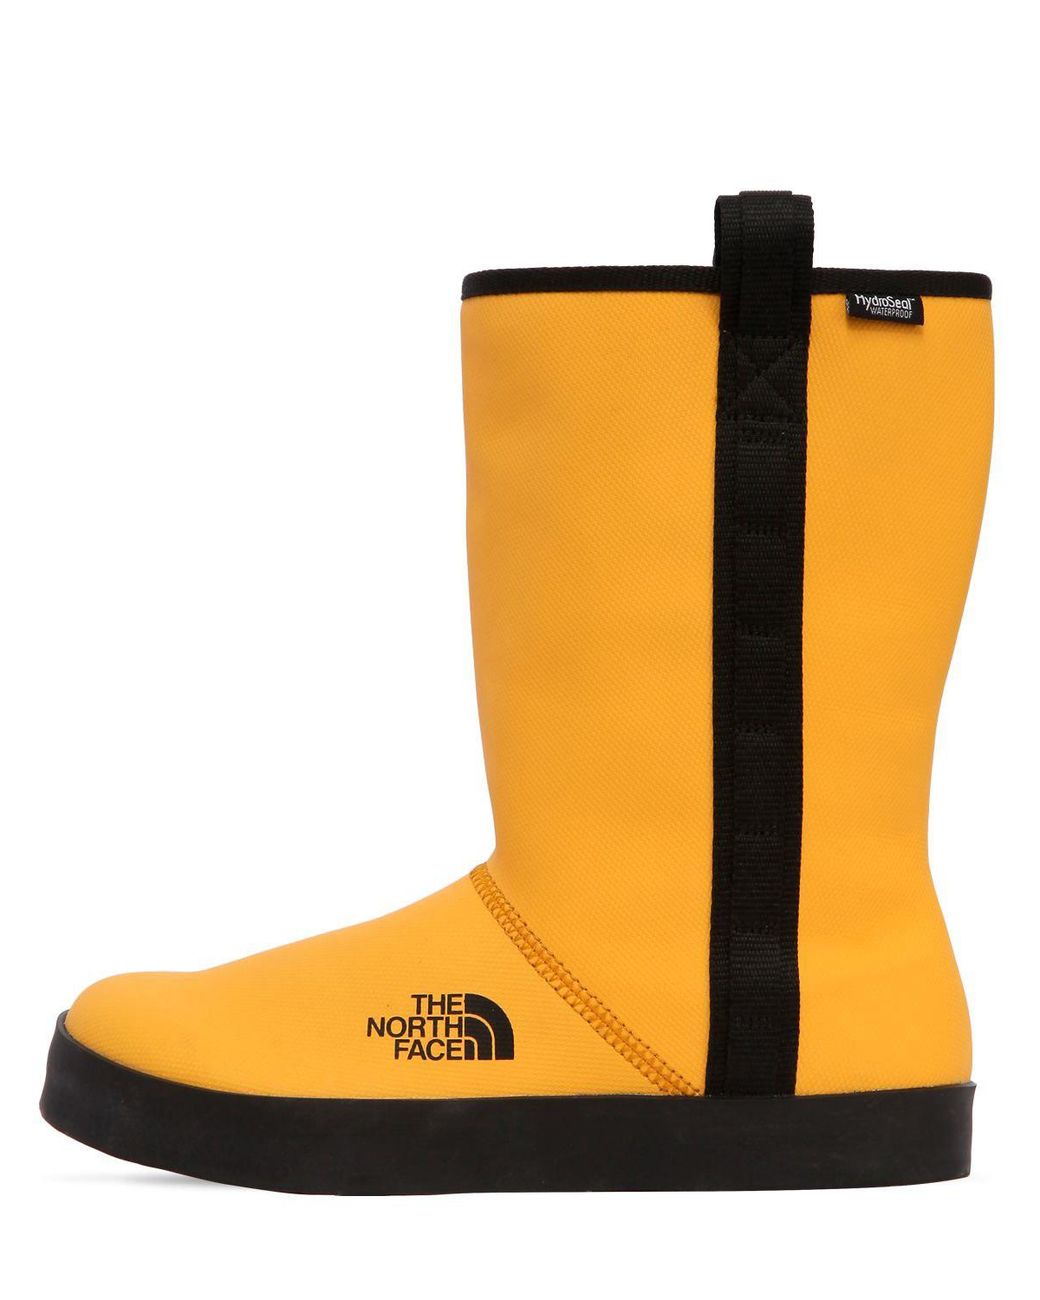 The North Face Base Camp Waterproof Short Rain Boots in Yellow | Lyst Canada